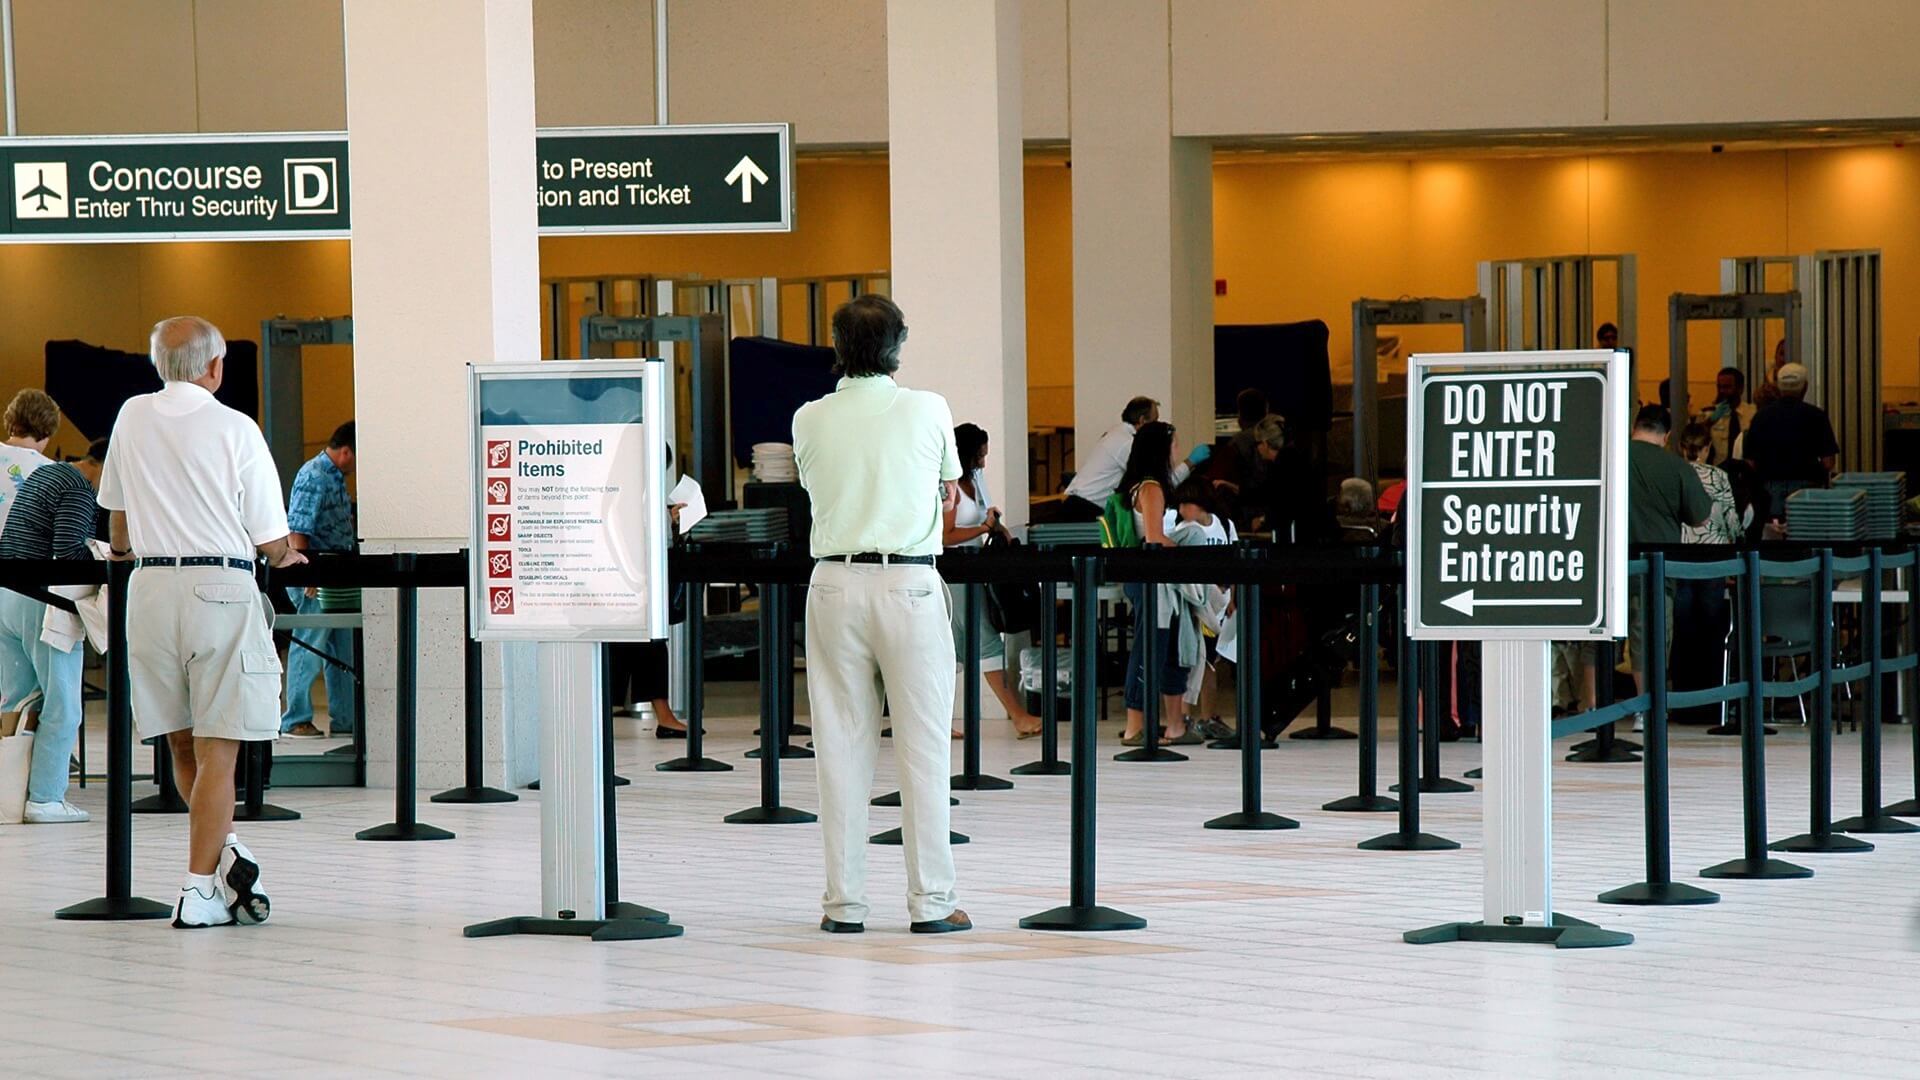 Airport,Queuing,Stanchions,Signage,Directrac